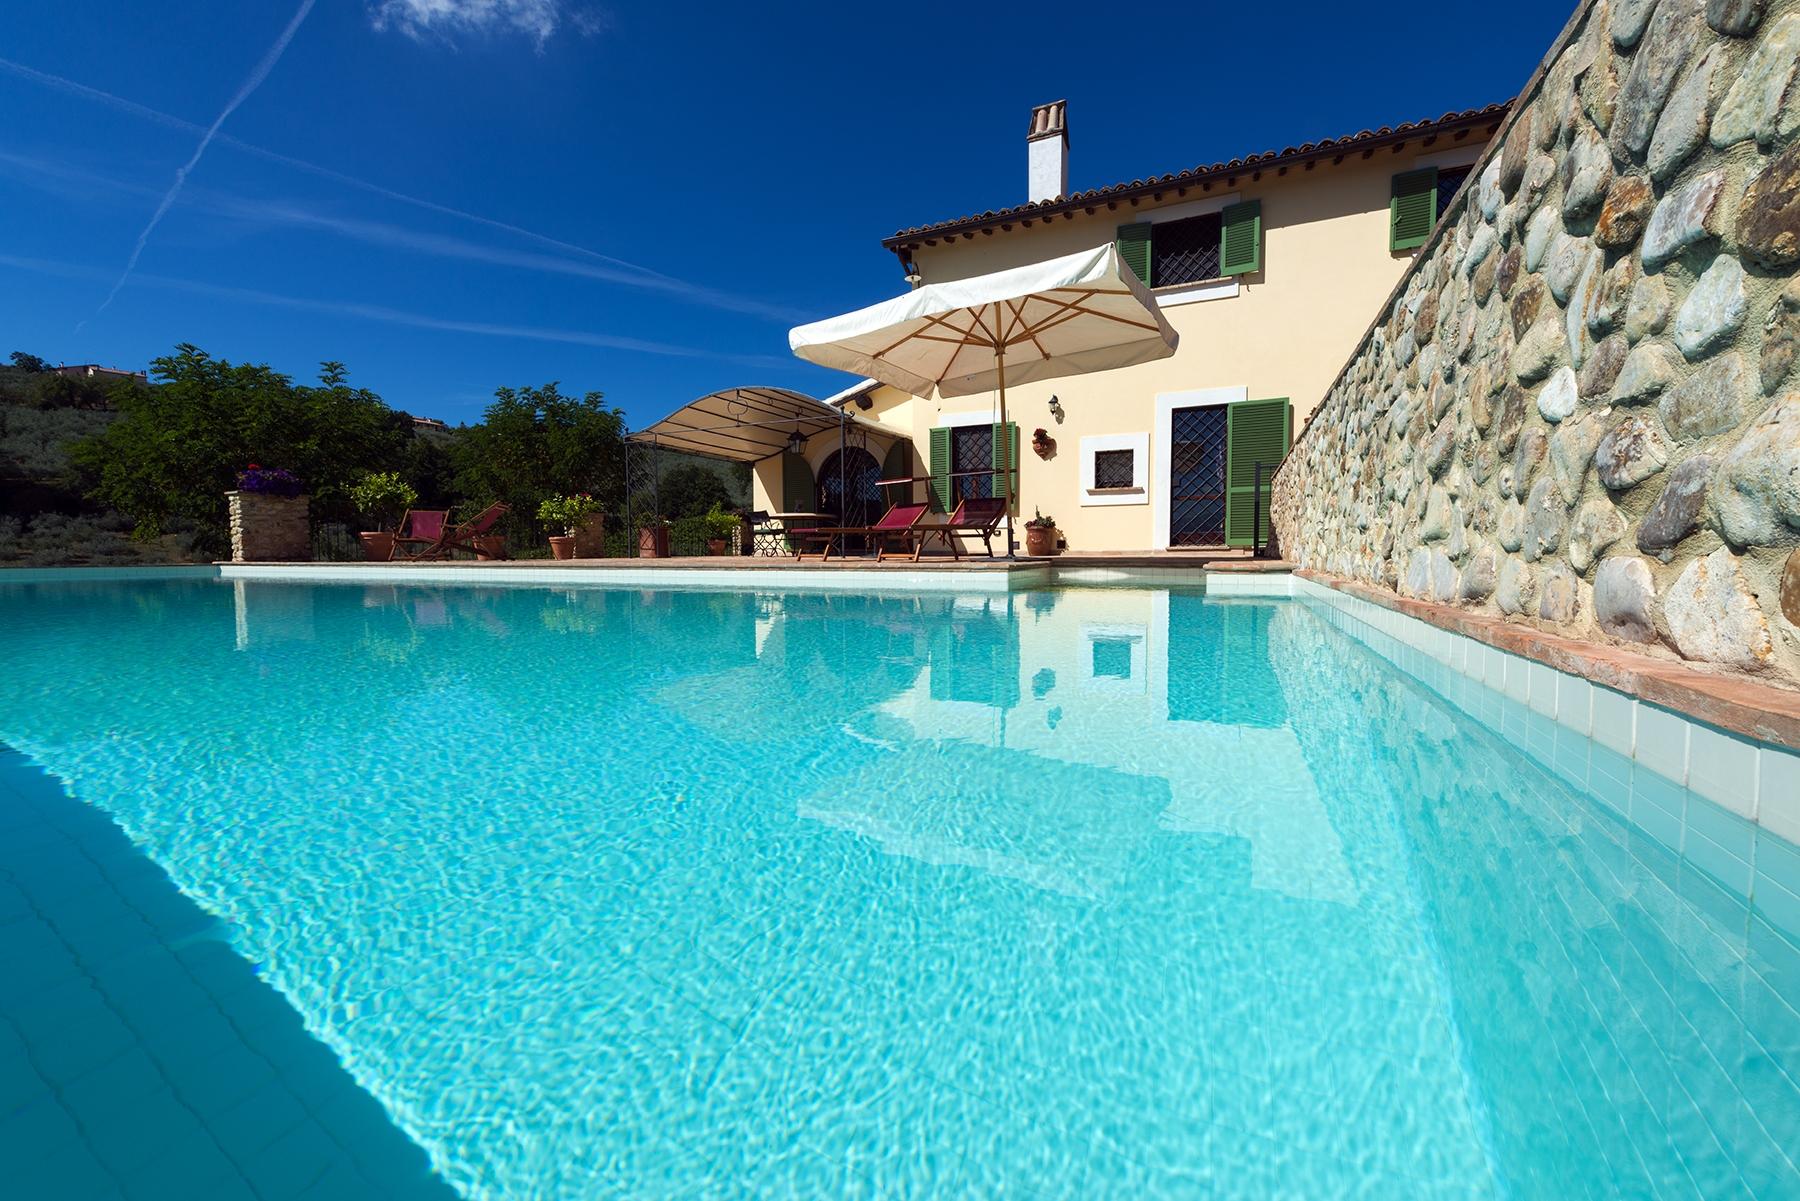 Enchanting property in the Umbrian hills - 2